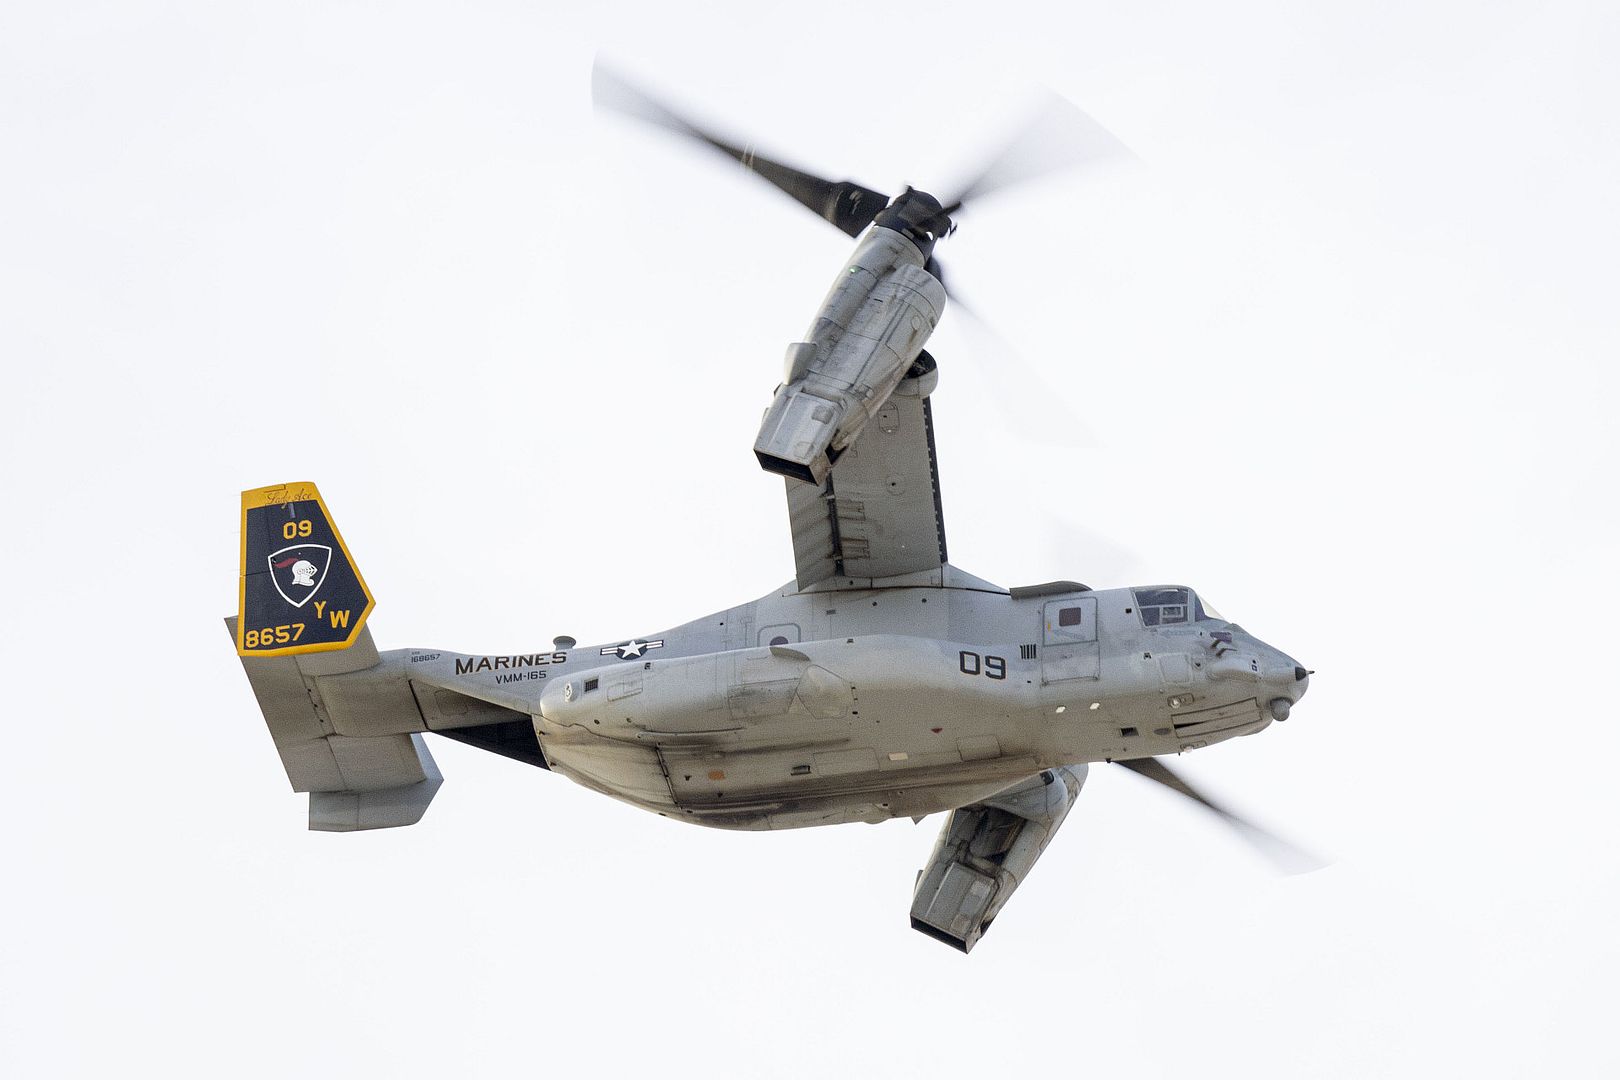 22B Osprey With Marine Medium Tilt Rotor Squadron 165 Marine Air Group 16 3rd Marine Aircraft Wing Flies To The Laguna Node During Exercise Steel Knight 23